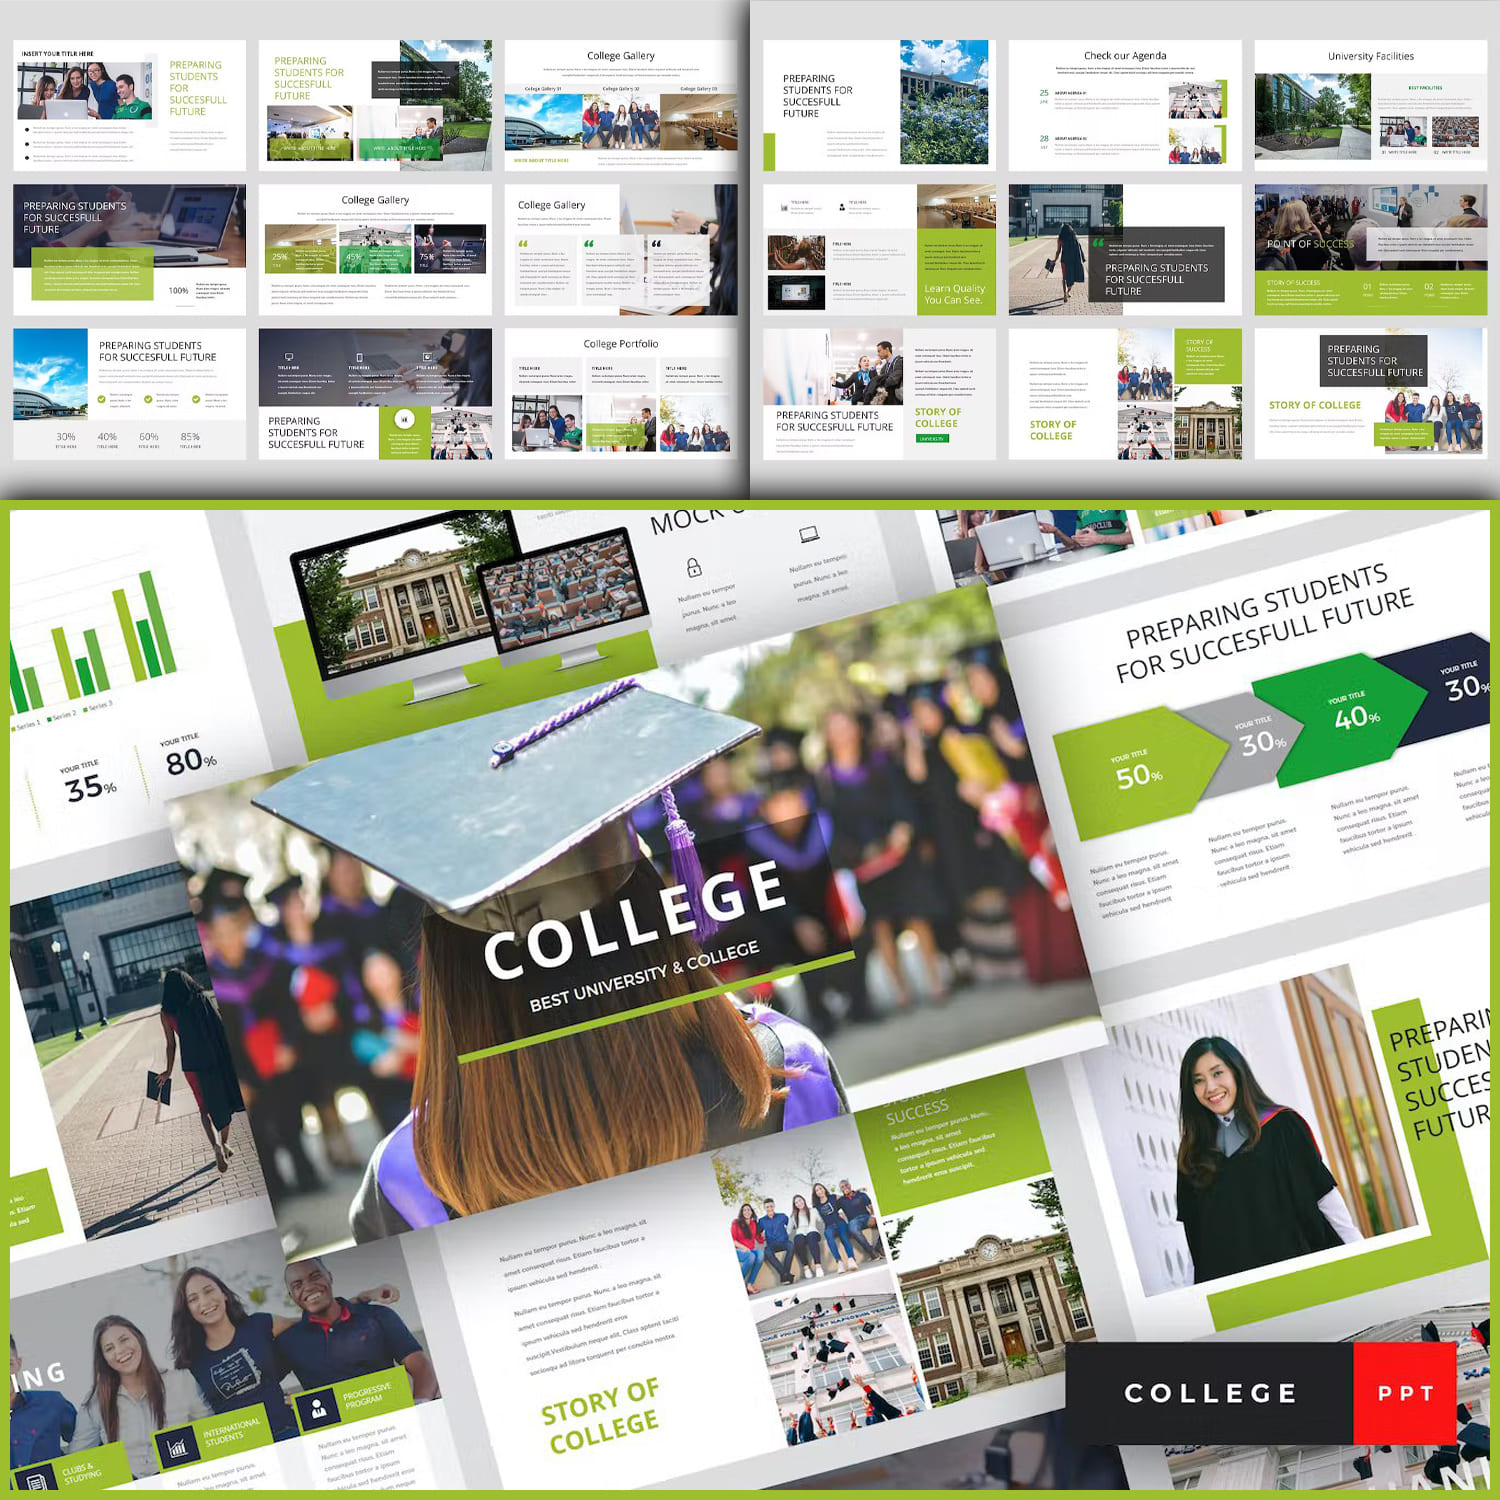 College - University PowerPoint Template Cover.